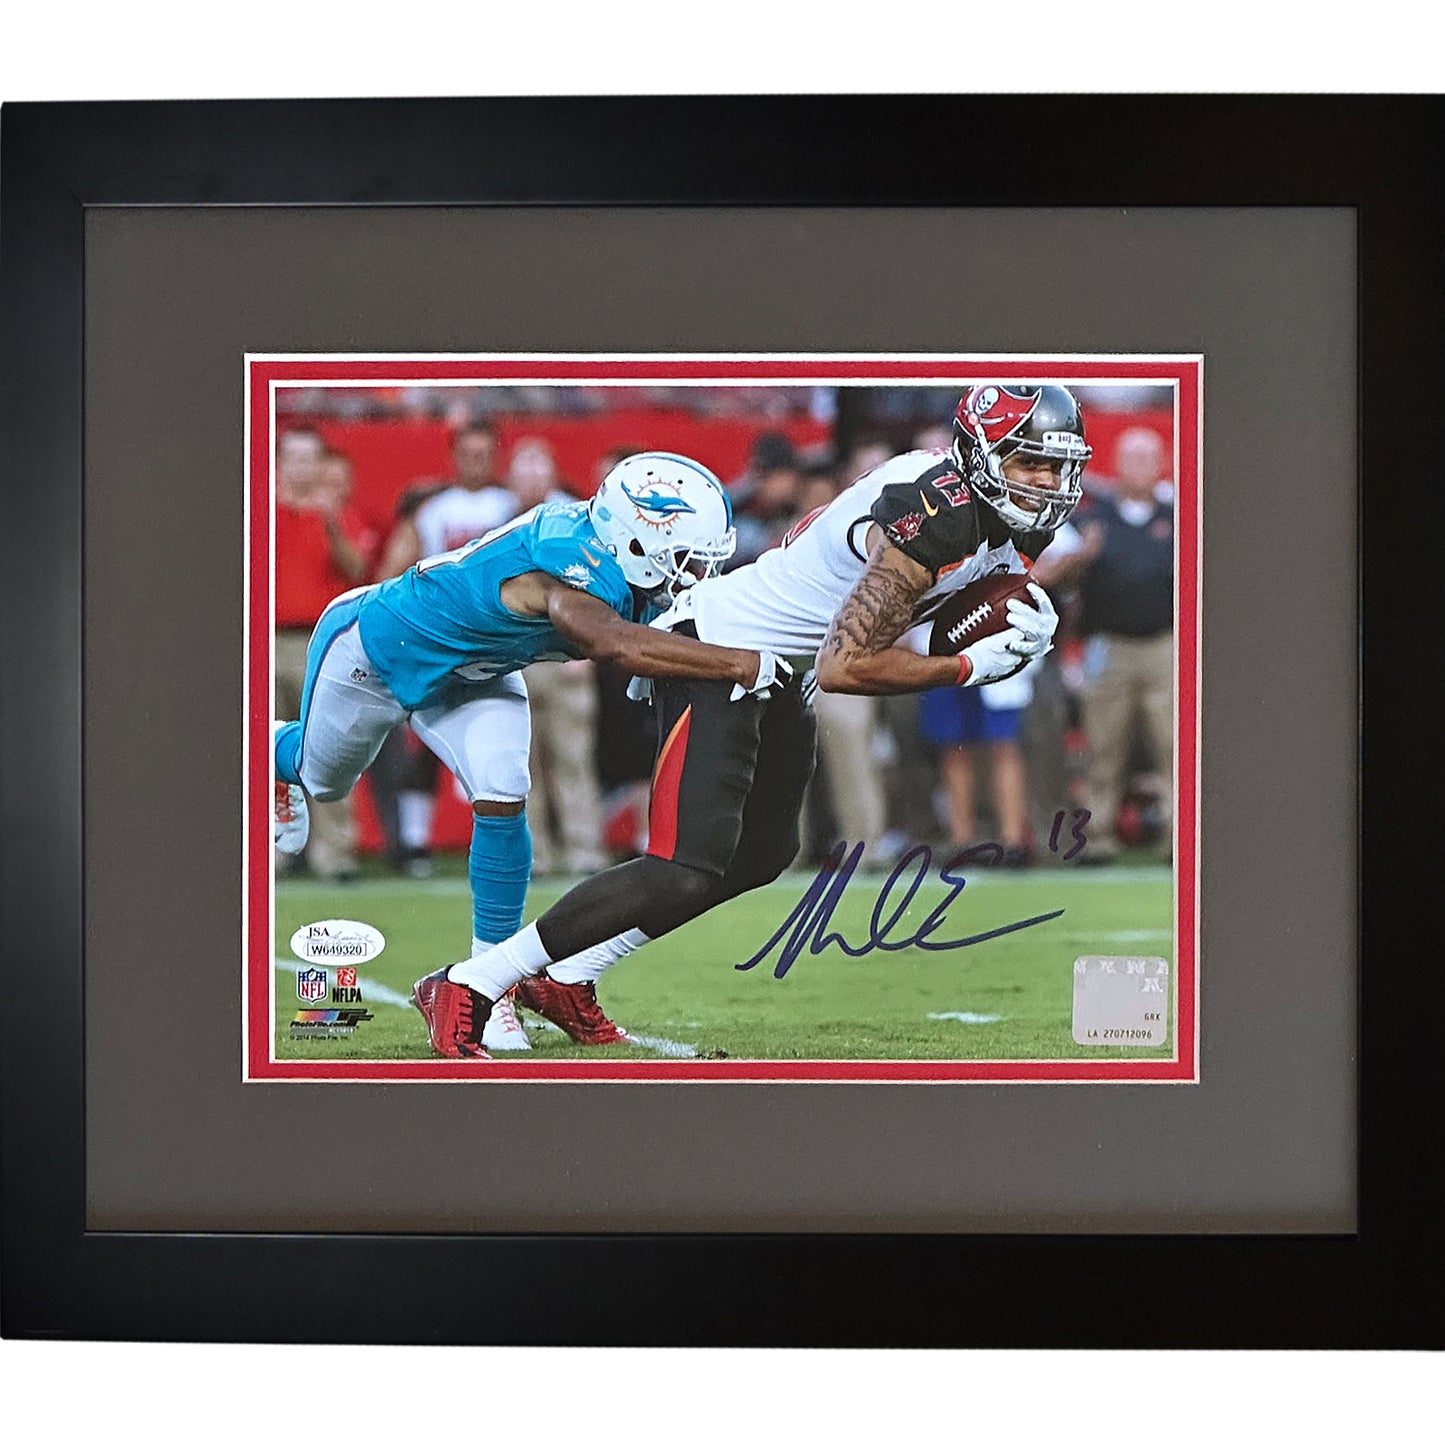 Mike Evans Autographed Tampa Bay Buccaneers (Horizontal) Framed 8x10 Photo - JSA